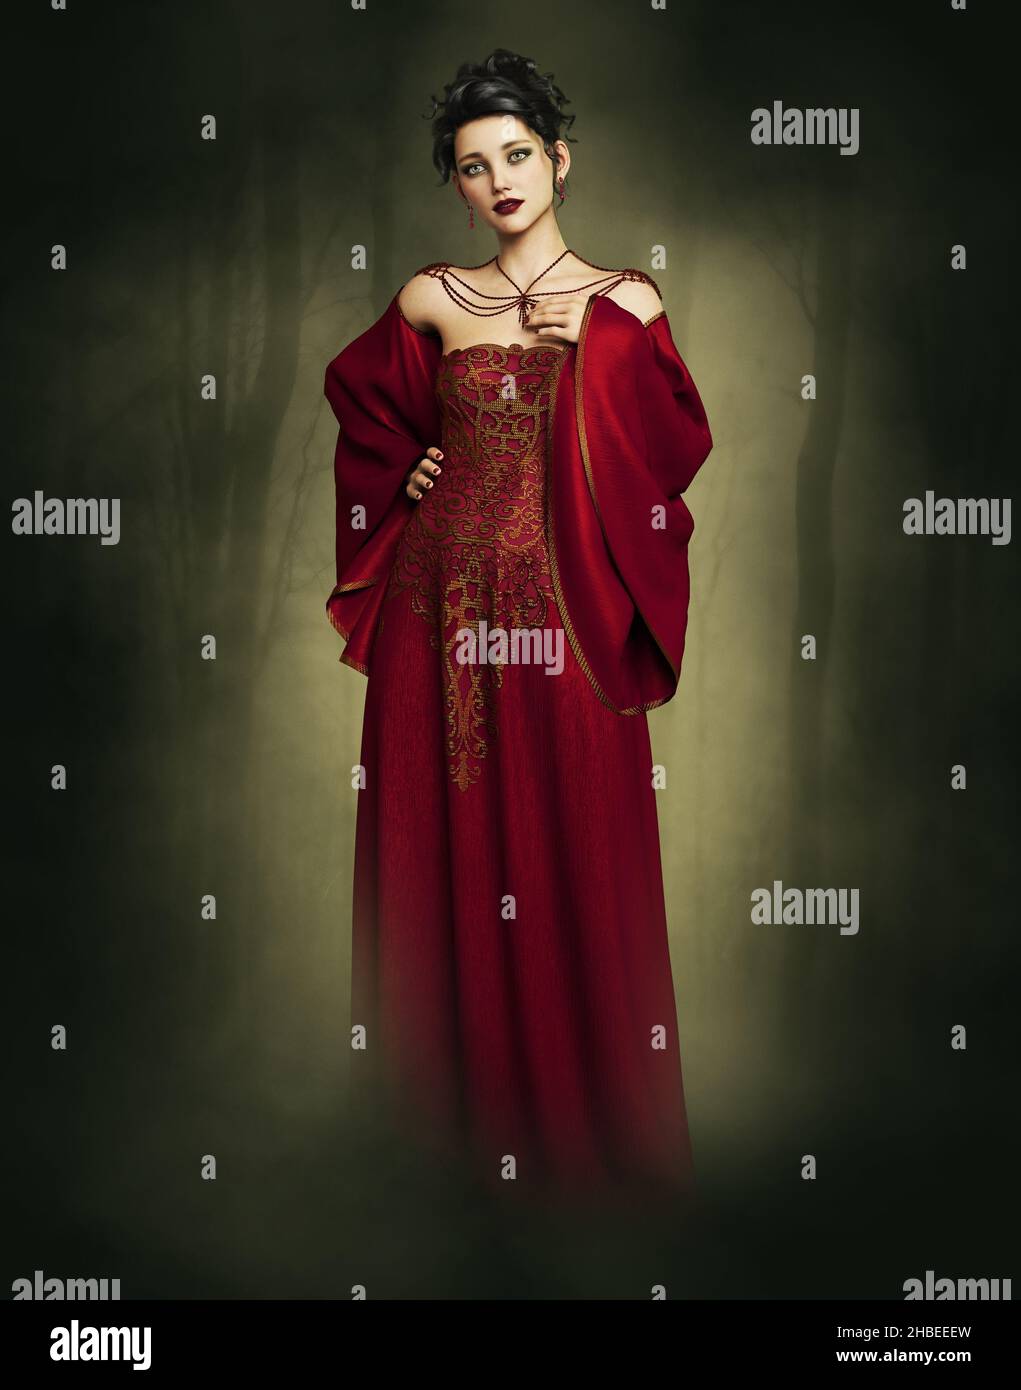 3d computer graphics of a woman with red evening gown and shoulder jewelry Stock Photo